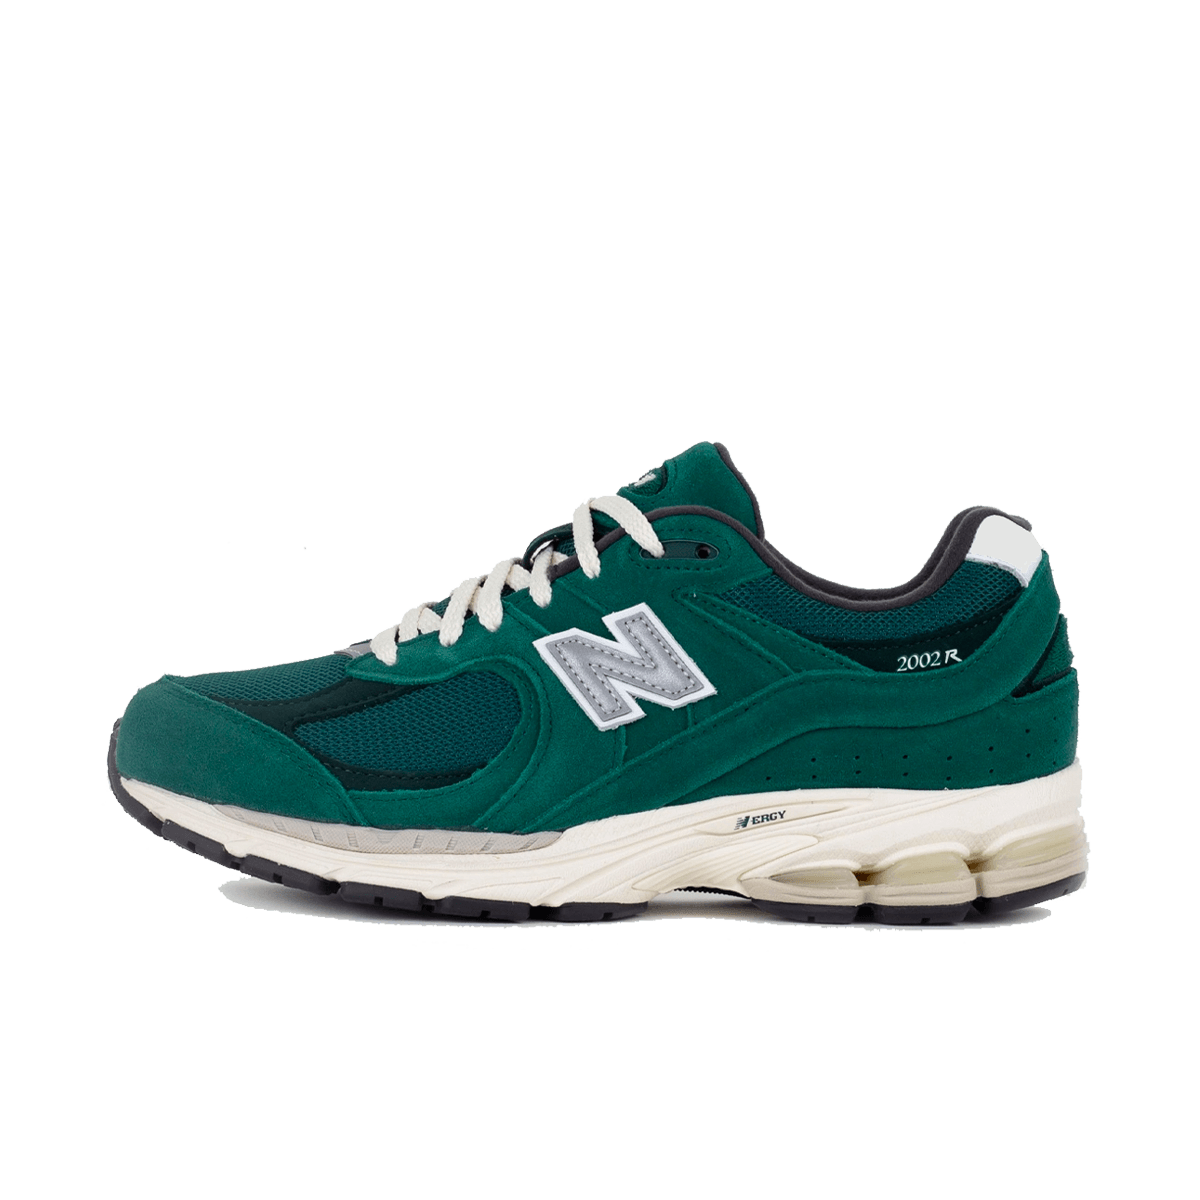 New Balance 2002R 'Forest Green' - Higher Learning Pack